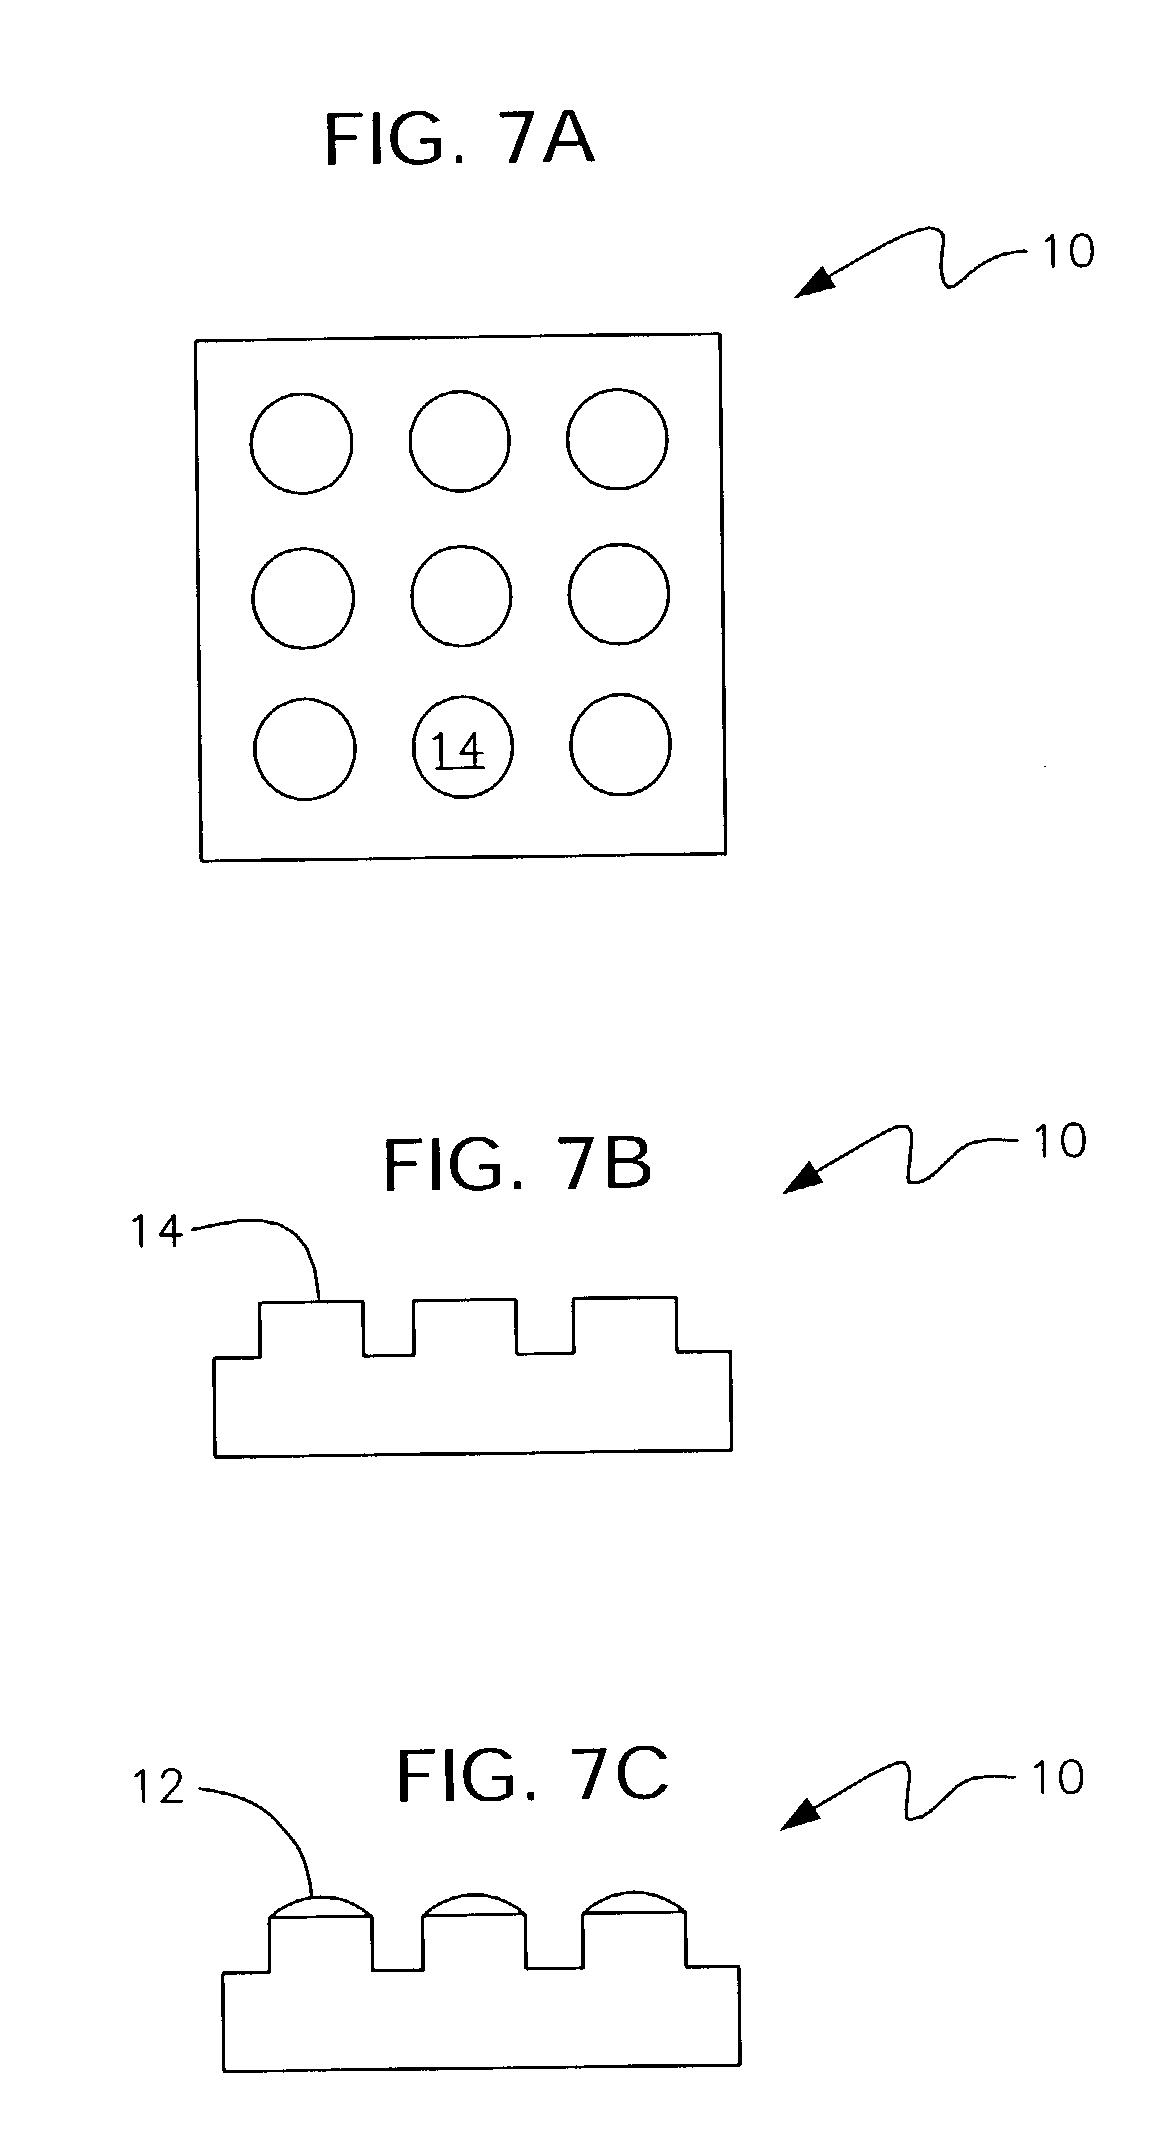 Methods for fabricating lenses at the end of optical fibers in the far field of the fiber aperture